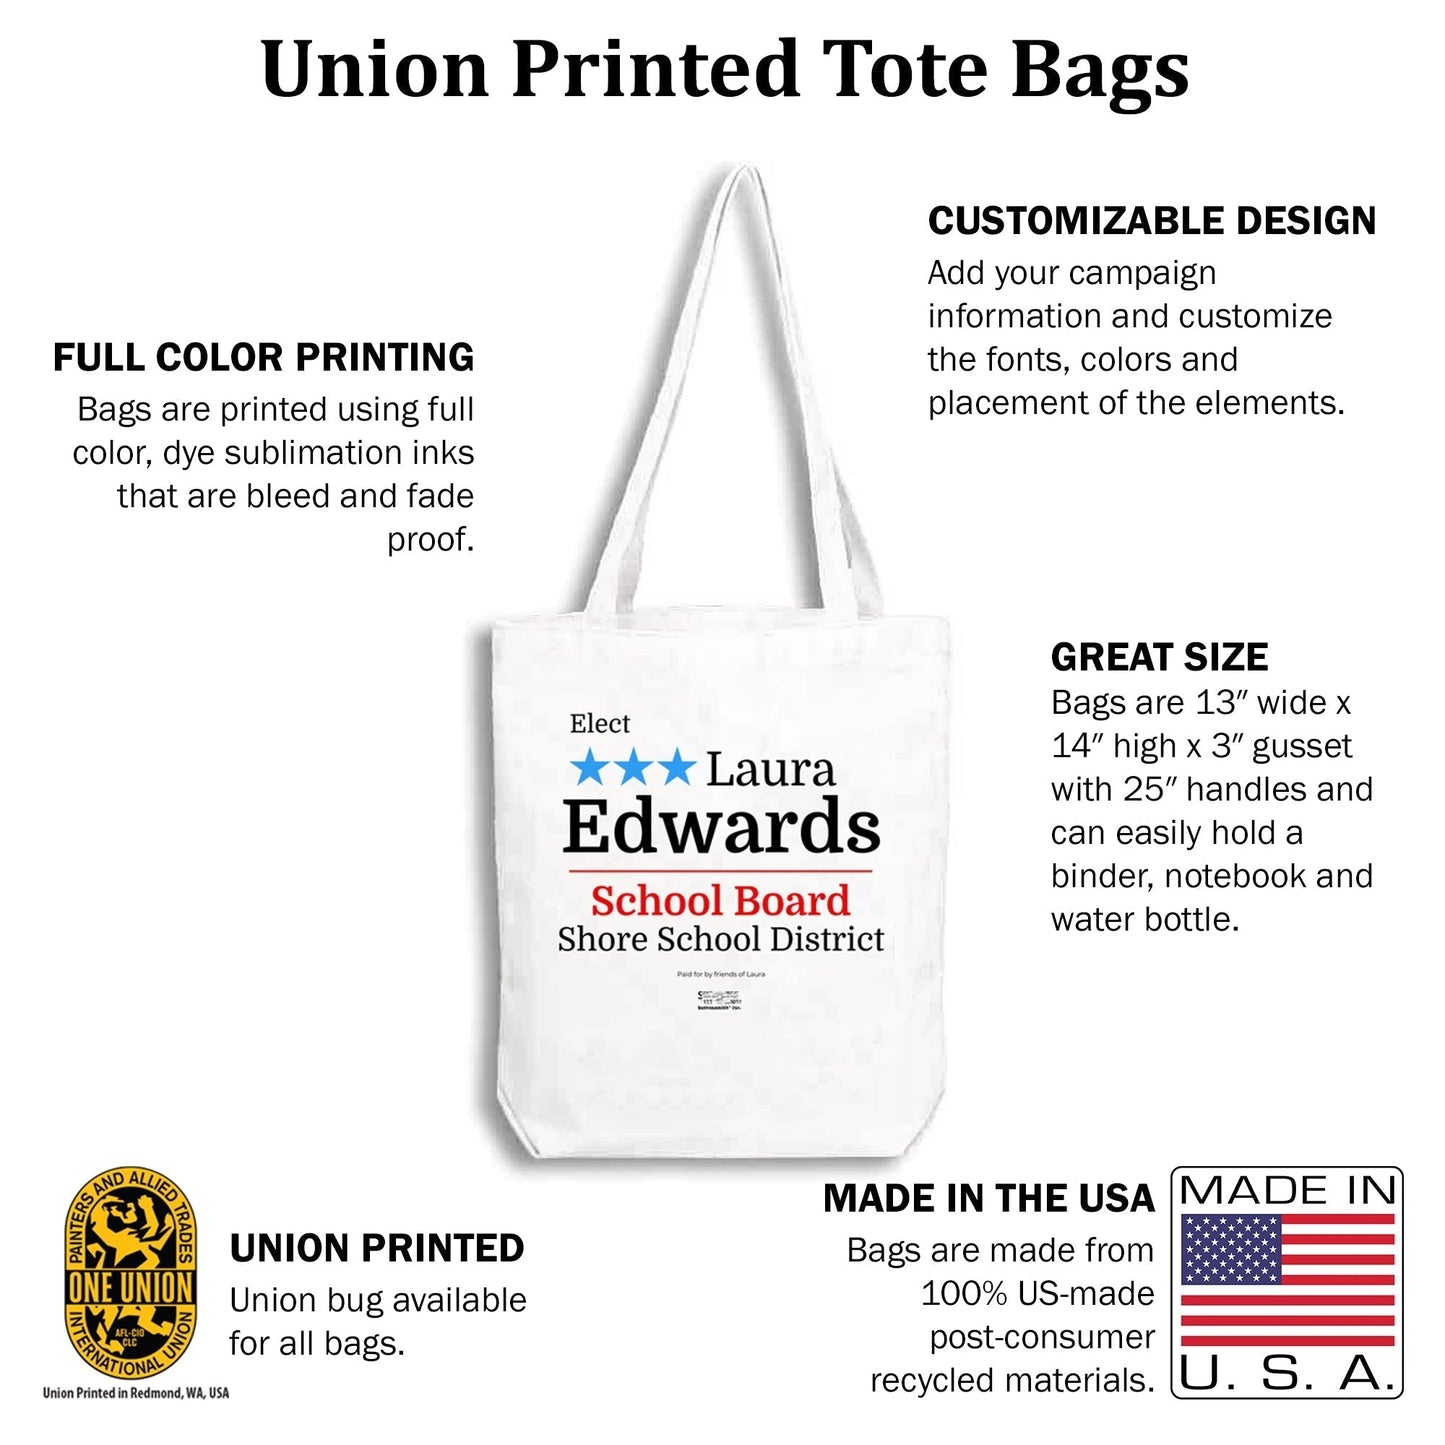 MerchBlue Union-Printed Tote Bag - Eco design - Made in the USA from recycled fabric